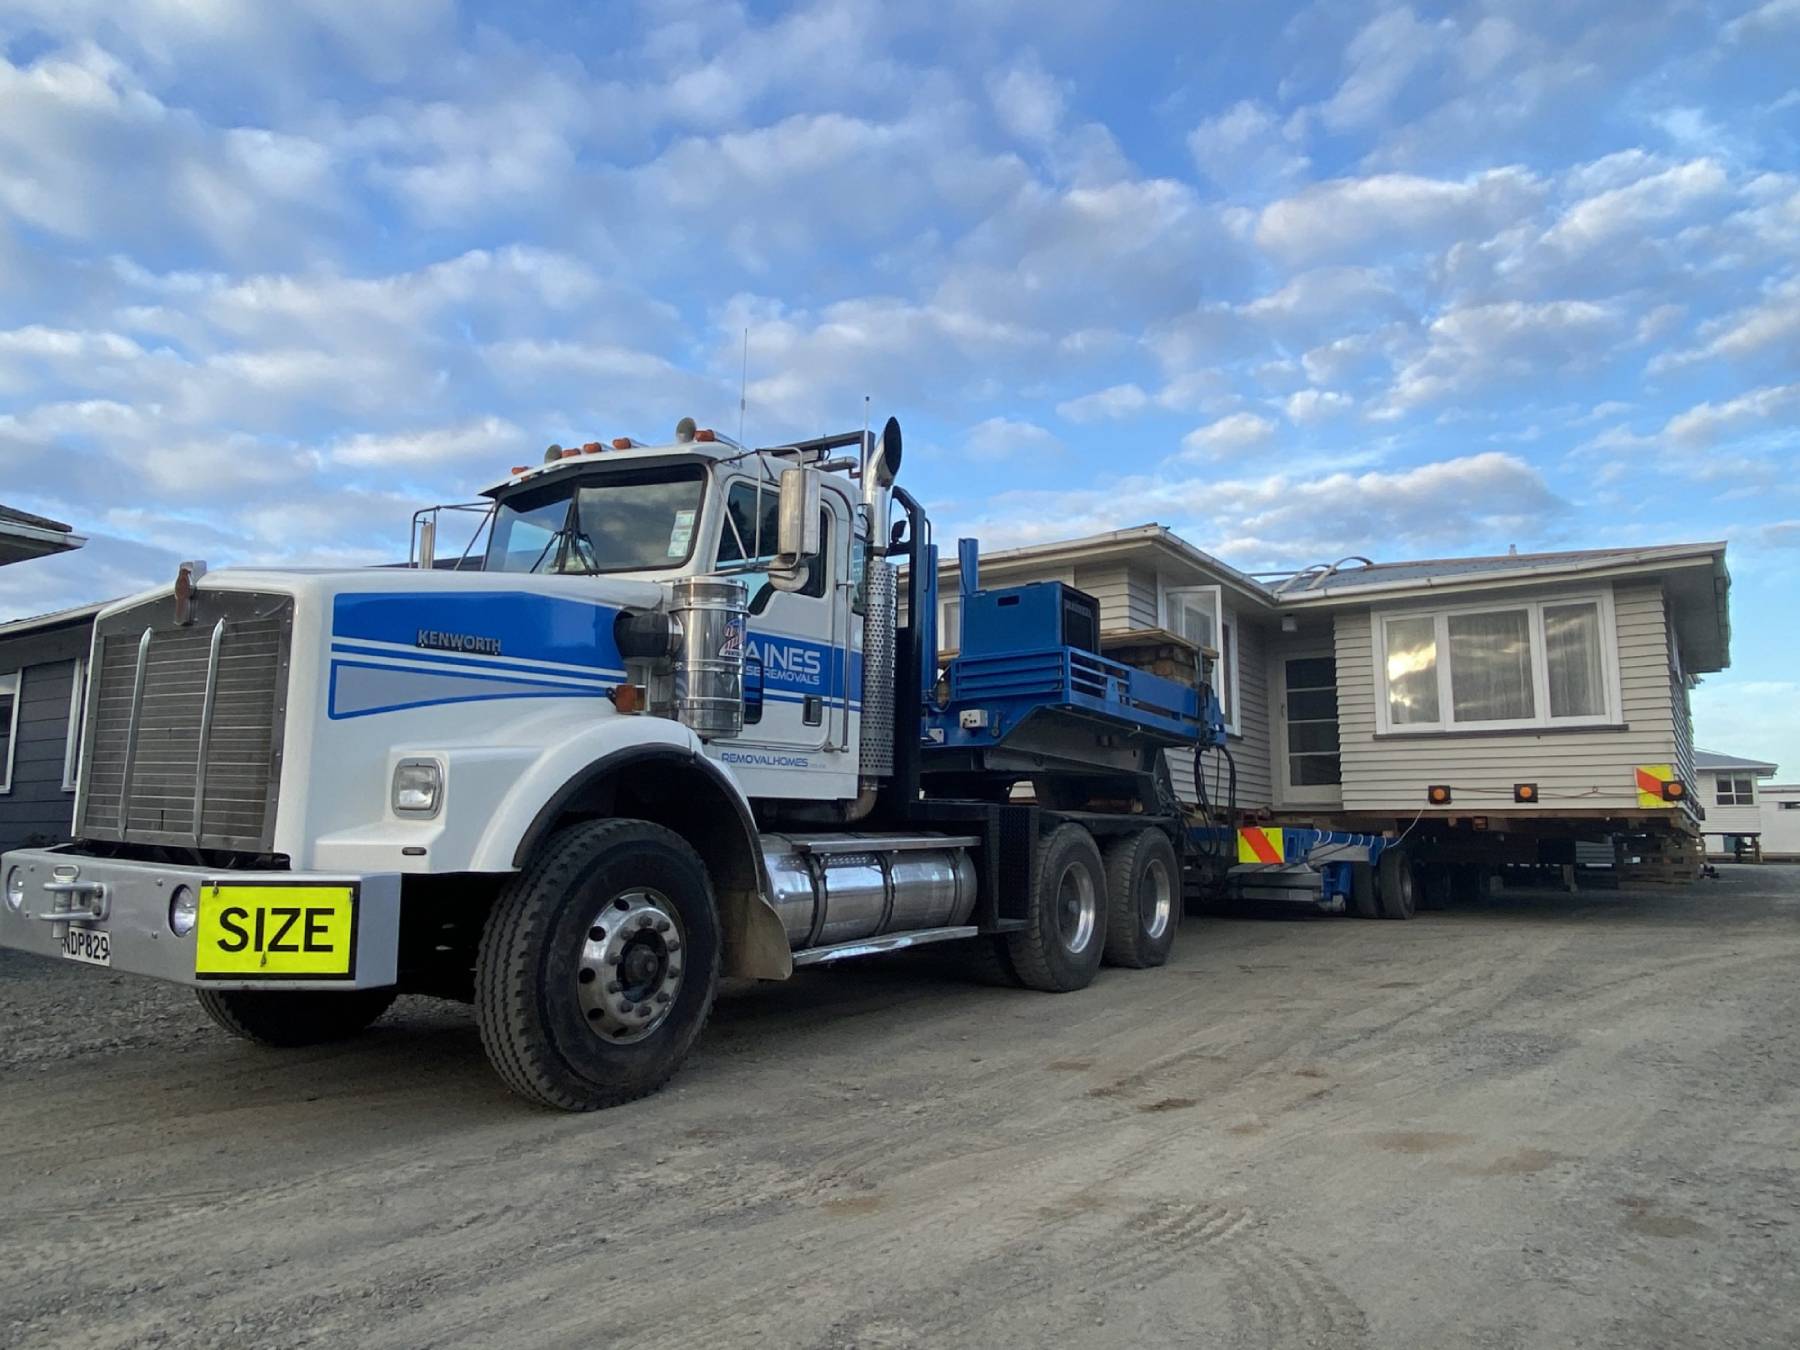 Housemoving Kenworth truck with Haines House Removal signwriting and wide house on back of trailer